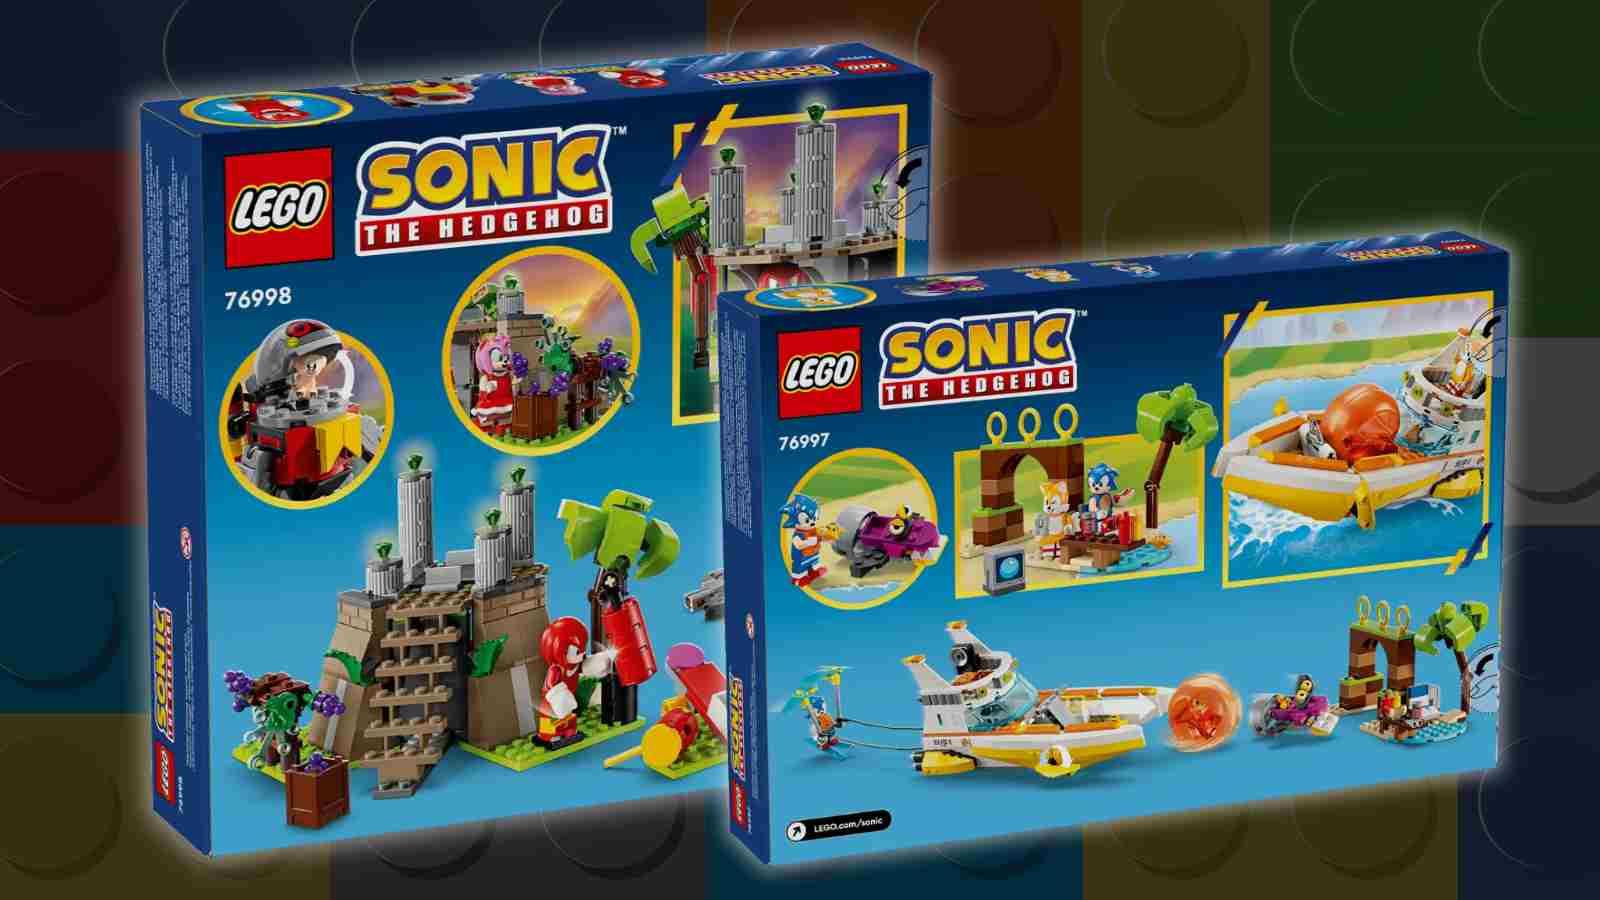 The upcoming LEGO Sonic sets on a LEGO background